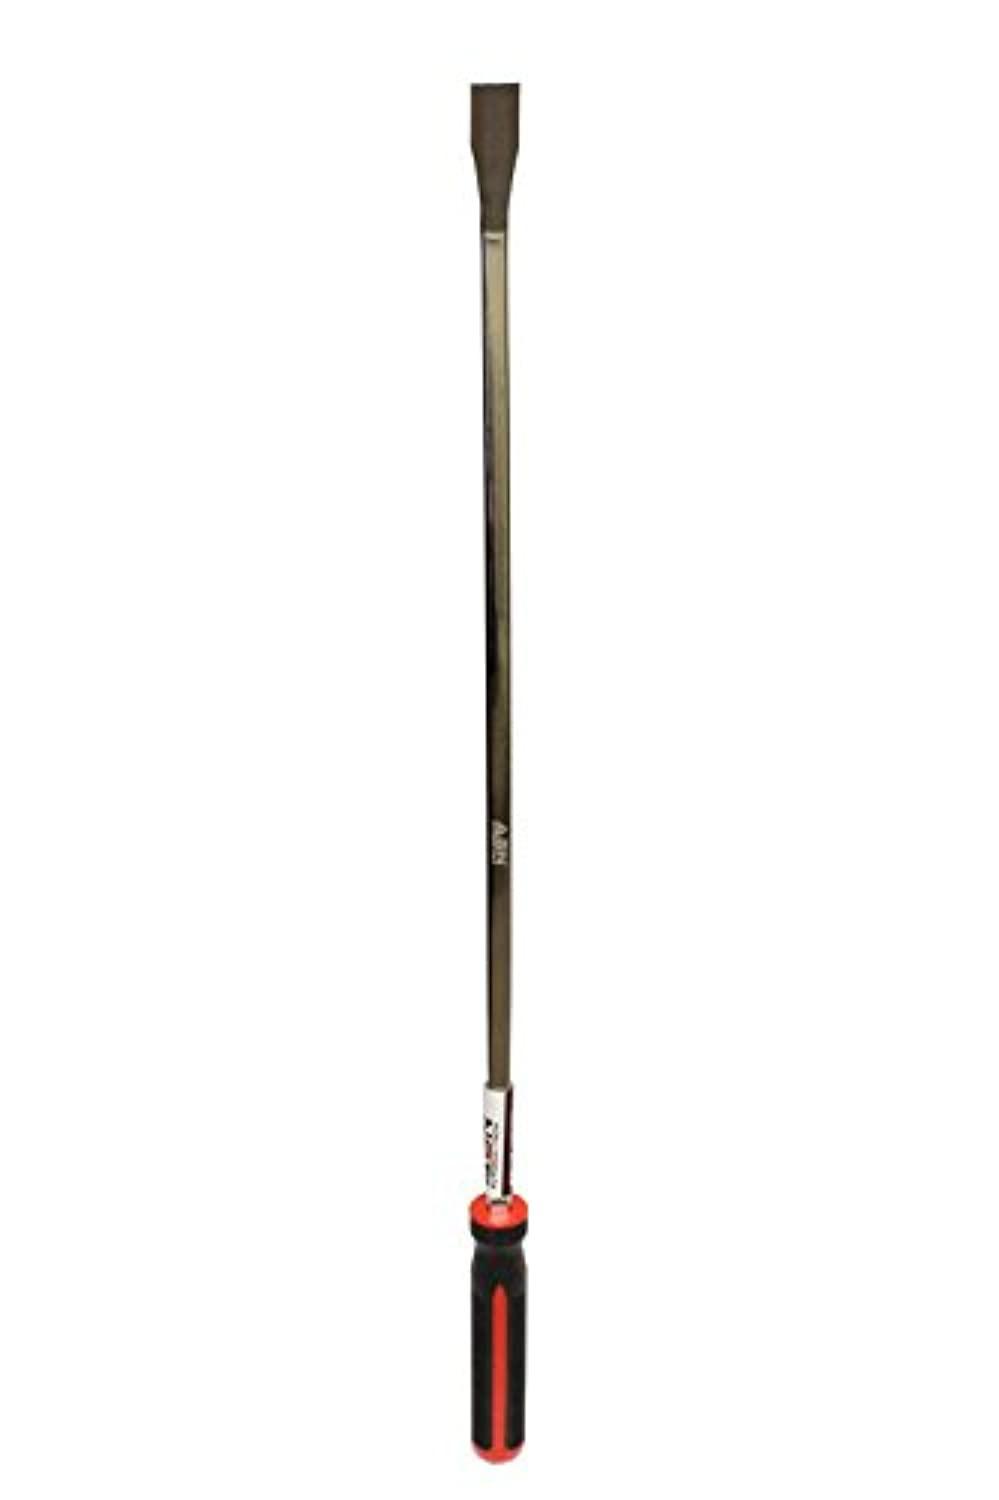 abn jumbo pry bar tool - 36in large breaker crowbar with oversized mechanics handle for heavy-duty automotive prying